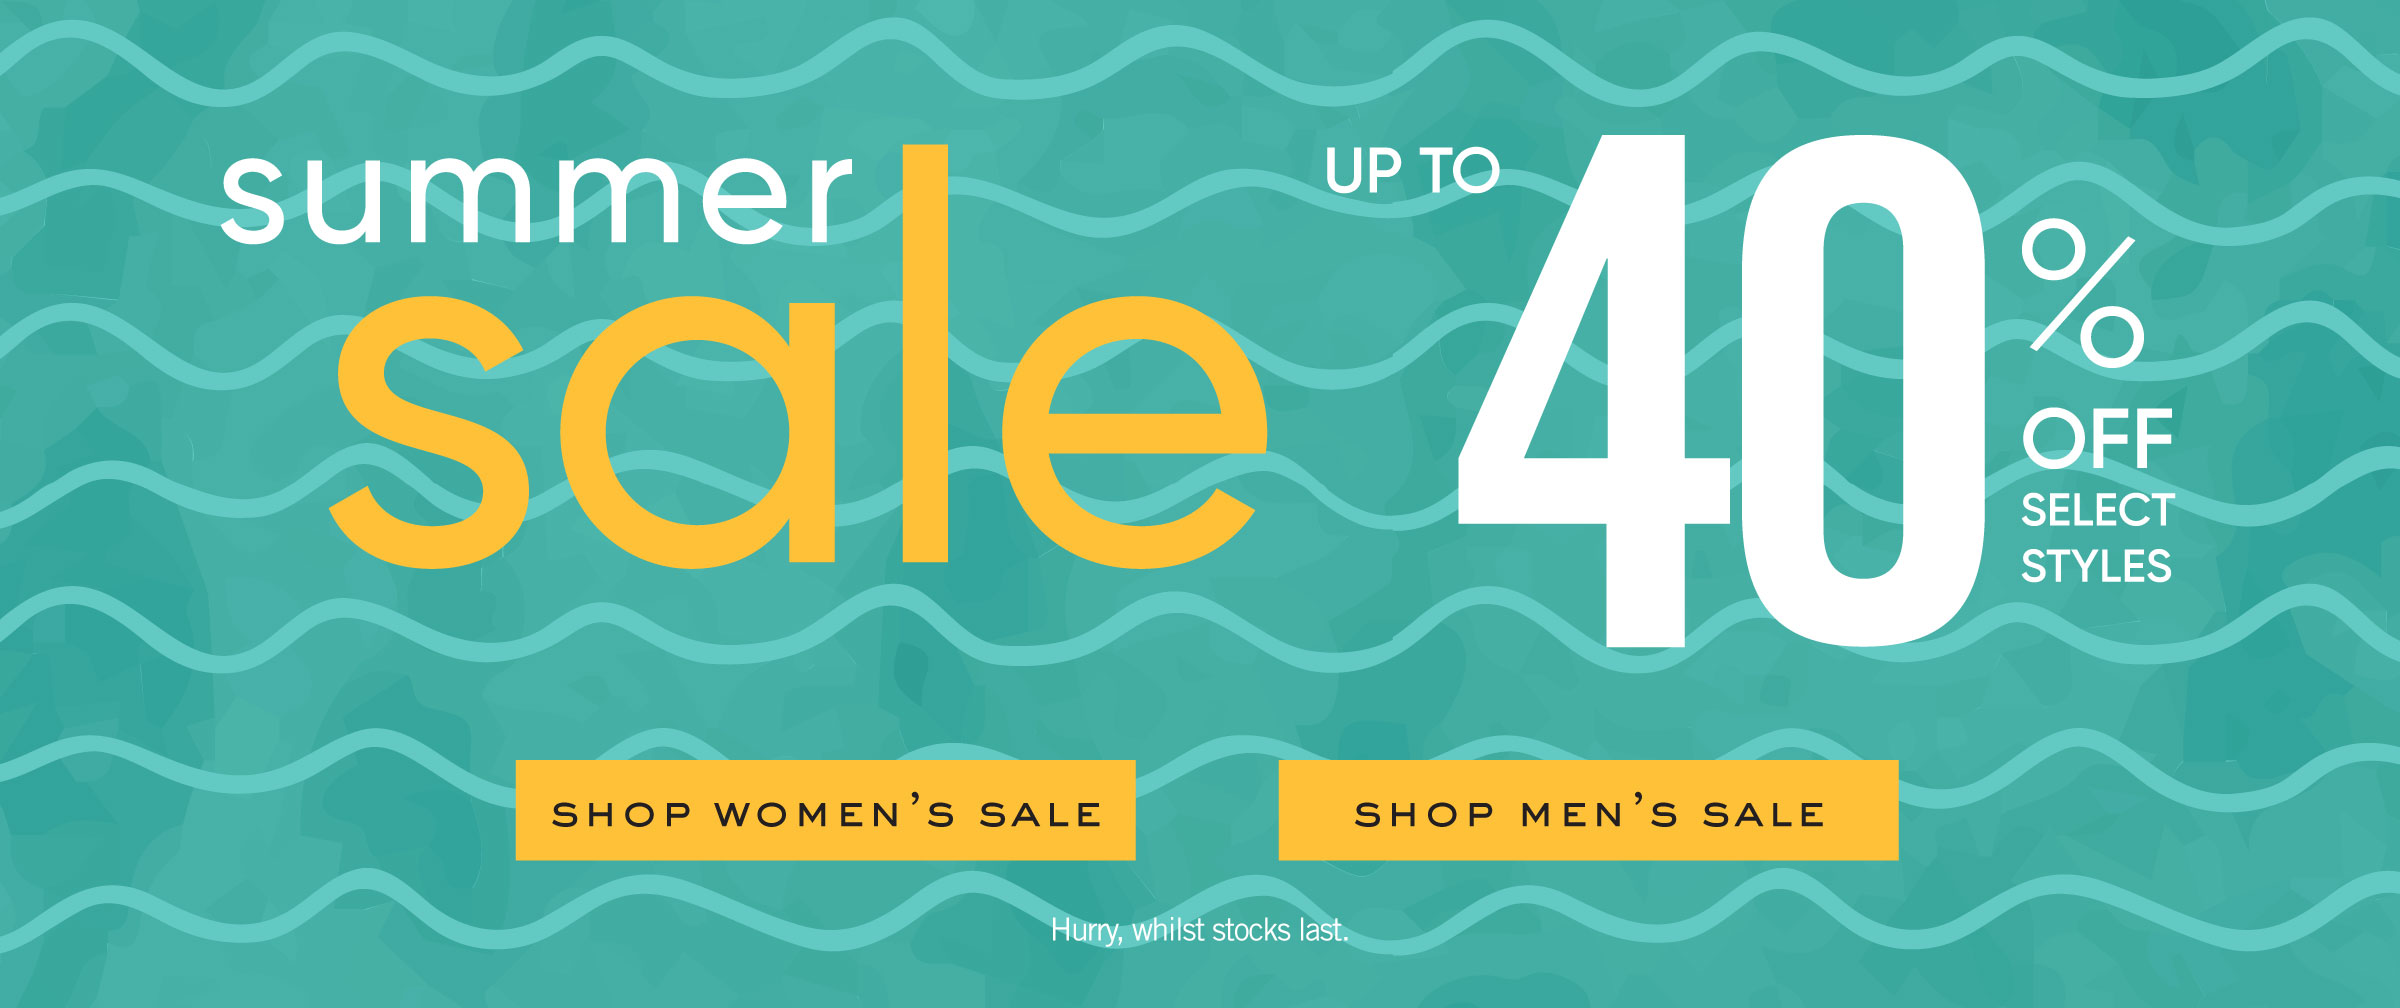 Summer Sale Up to 40% OFF